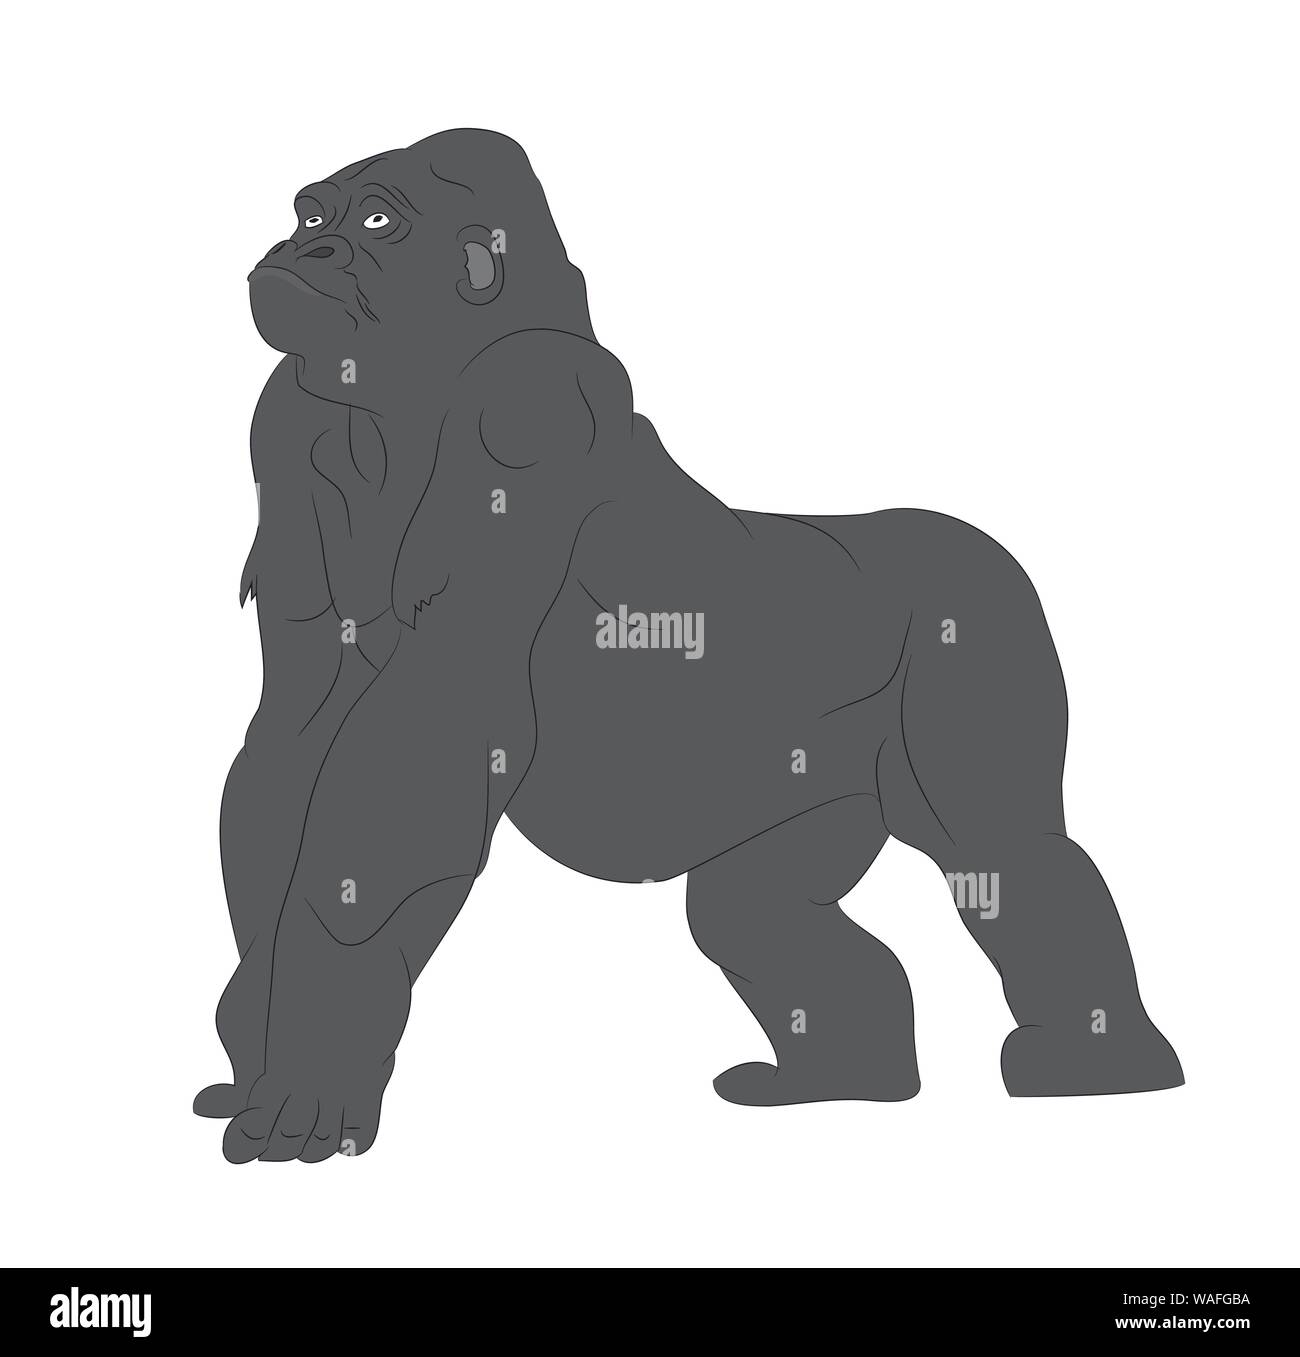 https://c8.alamy.com/comp/WAFGBA/vector-illustration-of-a-gorilla-drawing-color-vector-white-background-WAFGBA.jpg